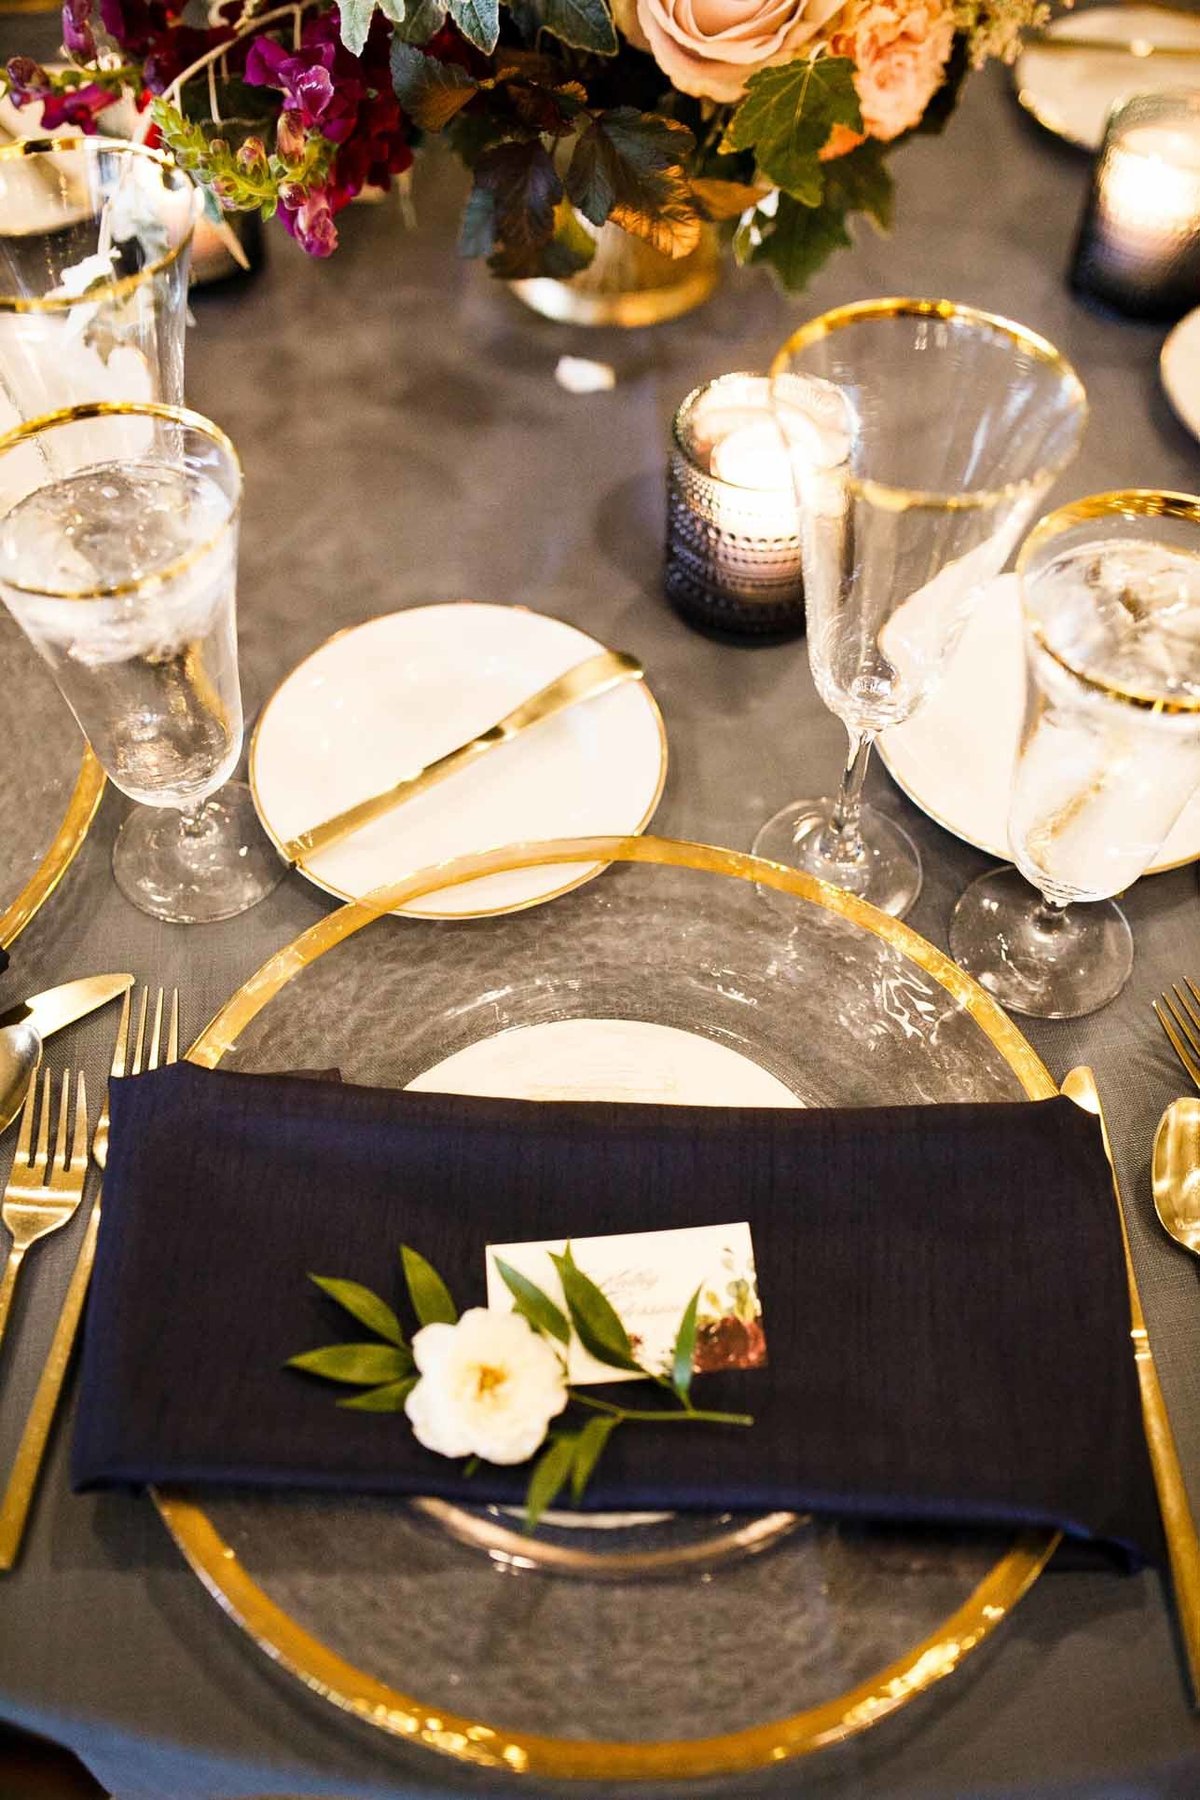 wedding reception place setting with navy blue linen, wrapped around gold rimmed glass charger lpate, with single flower on napkin